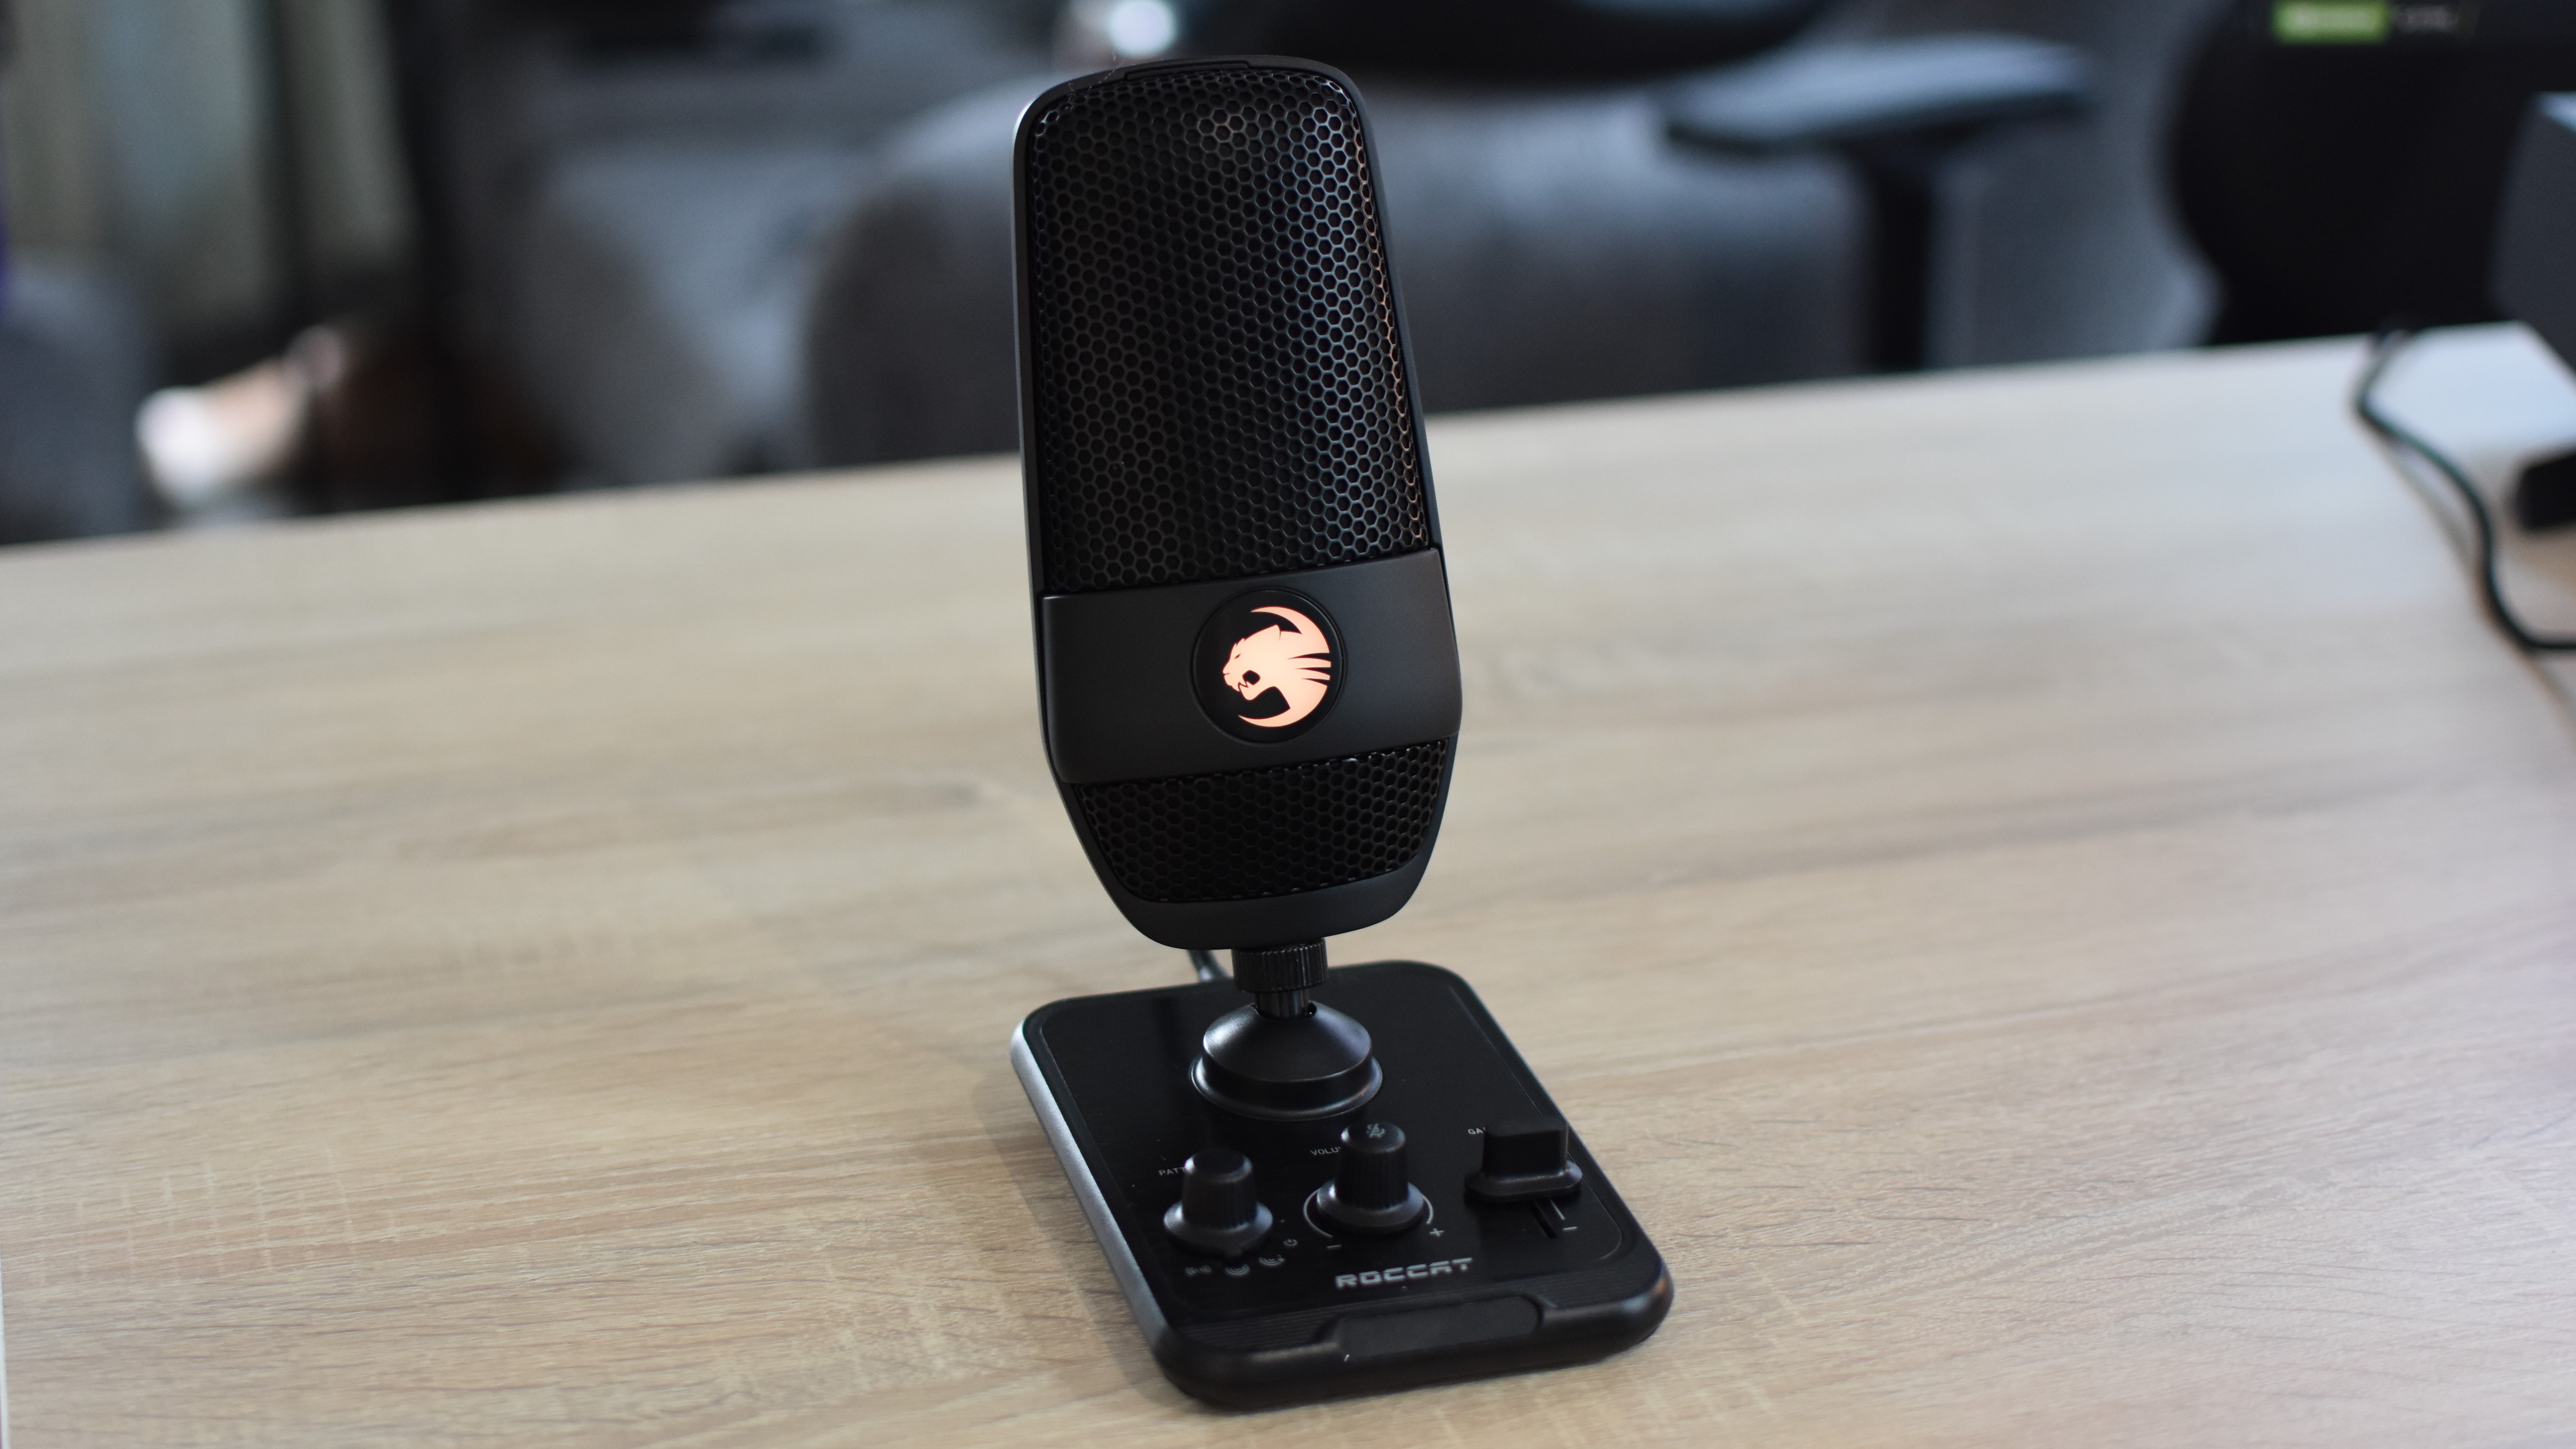 The Roccat Torch microphone on a desk.